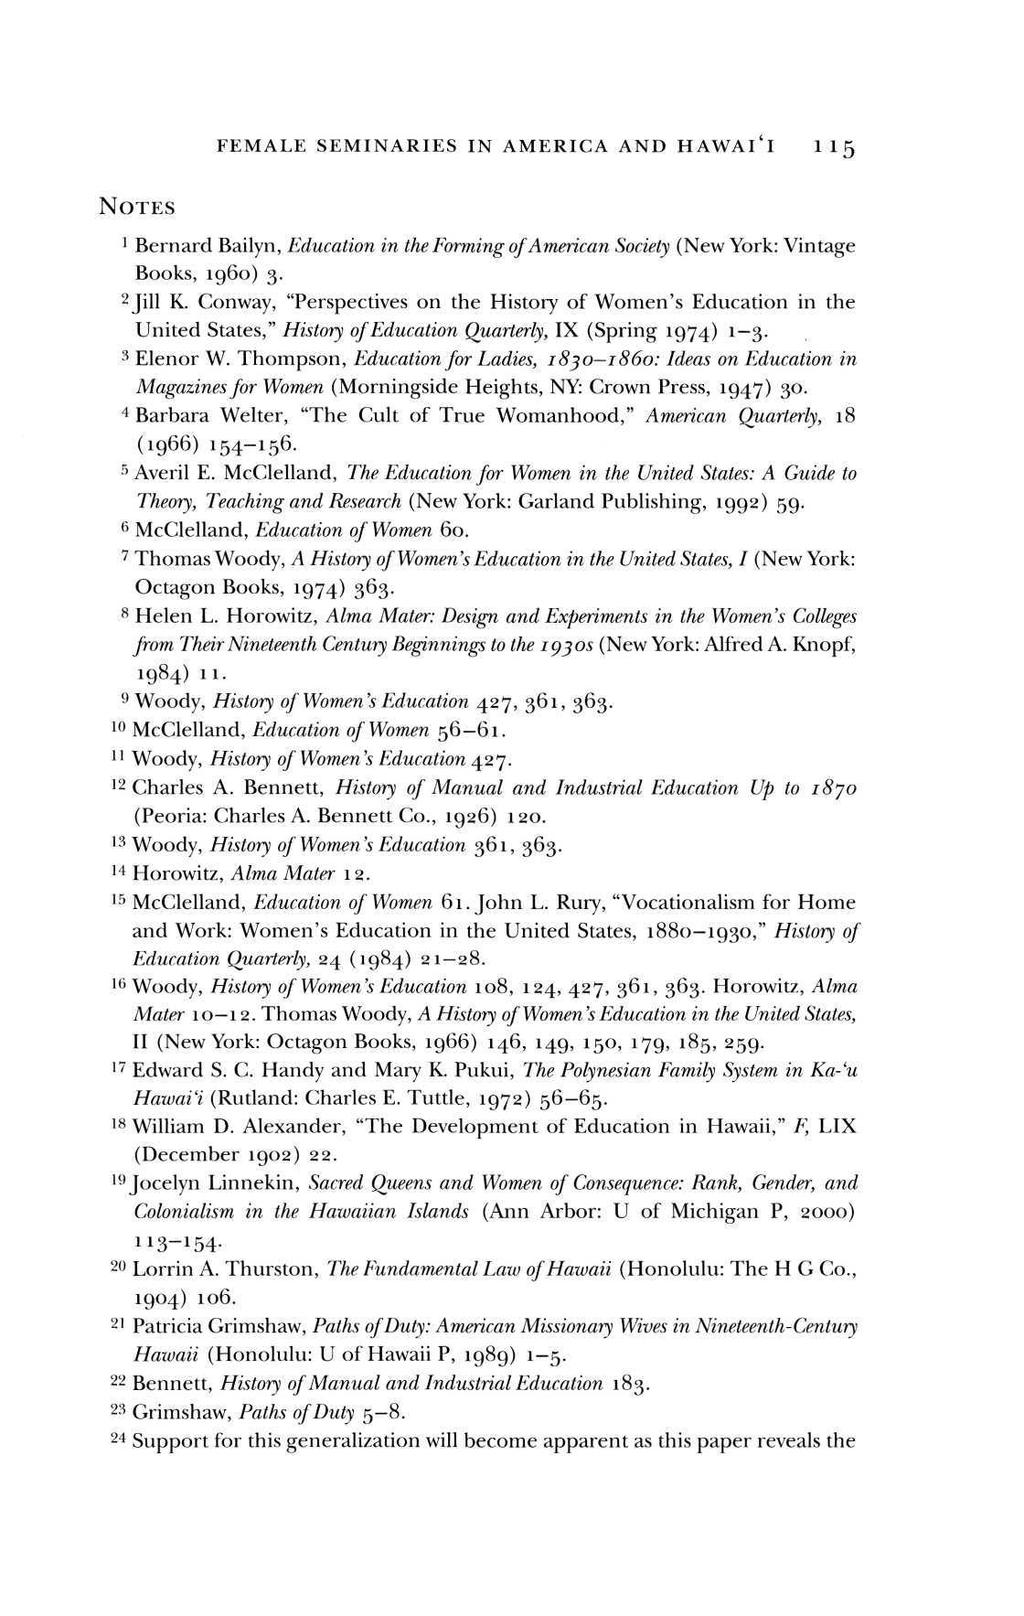 FEMALE SEMINARIES IN AMERICA AND HAWAI'I 115 NOTES 1 Bernard Bailyn, Education in the Forming of American Society (New York: Vintage Books, 1960) 3. 2 Jill K.